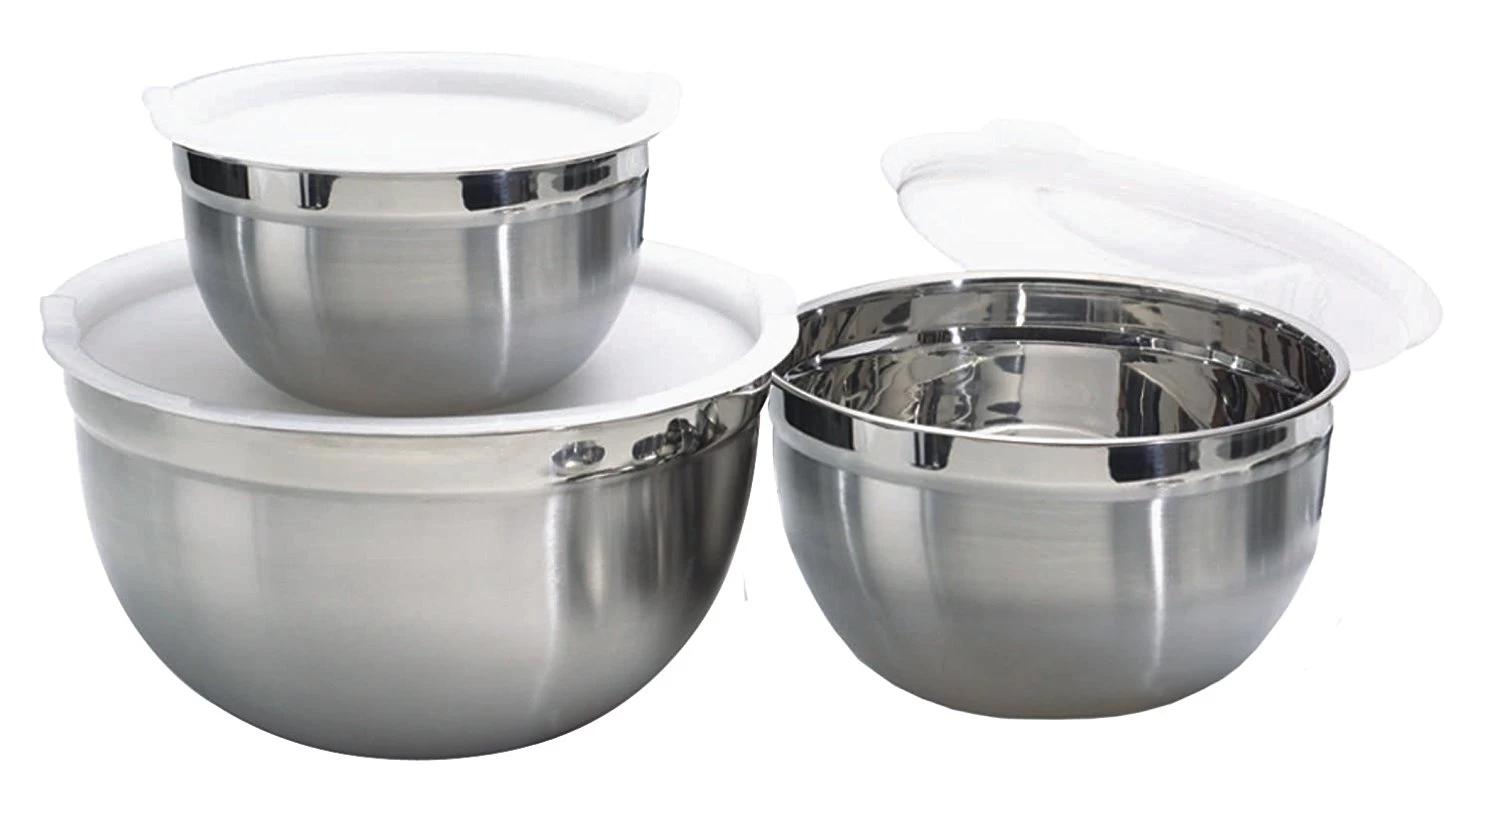 OEM Stainless Steel Mixing Bowl manufacturer, china Stainless Steel Housewares